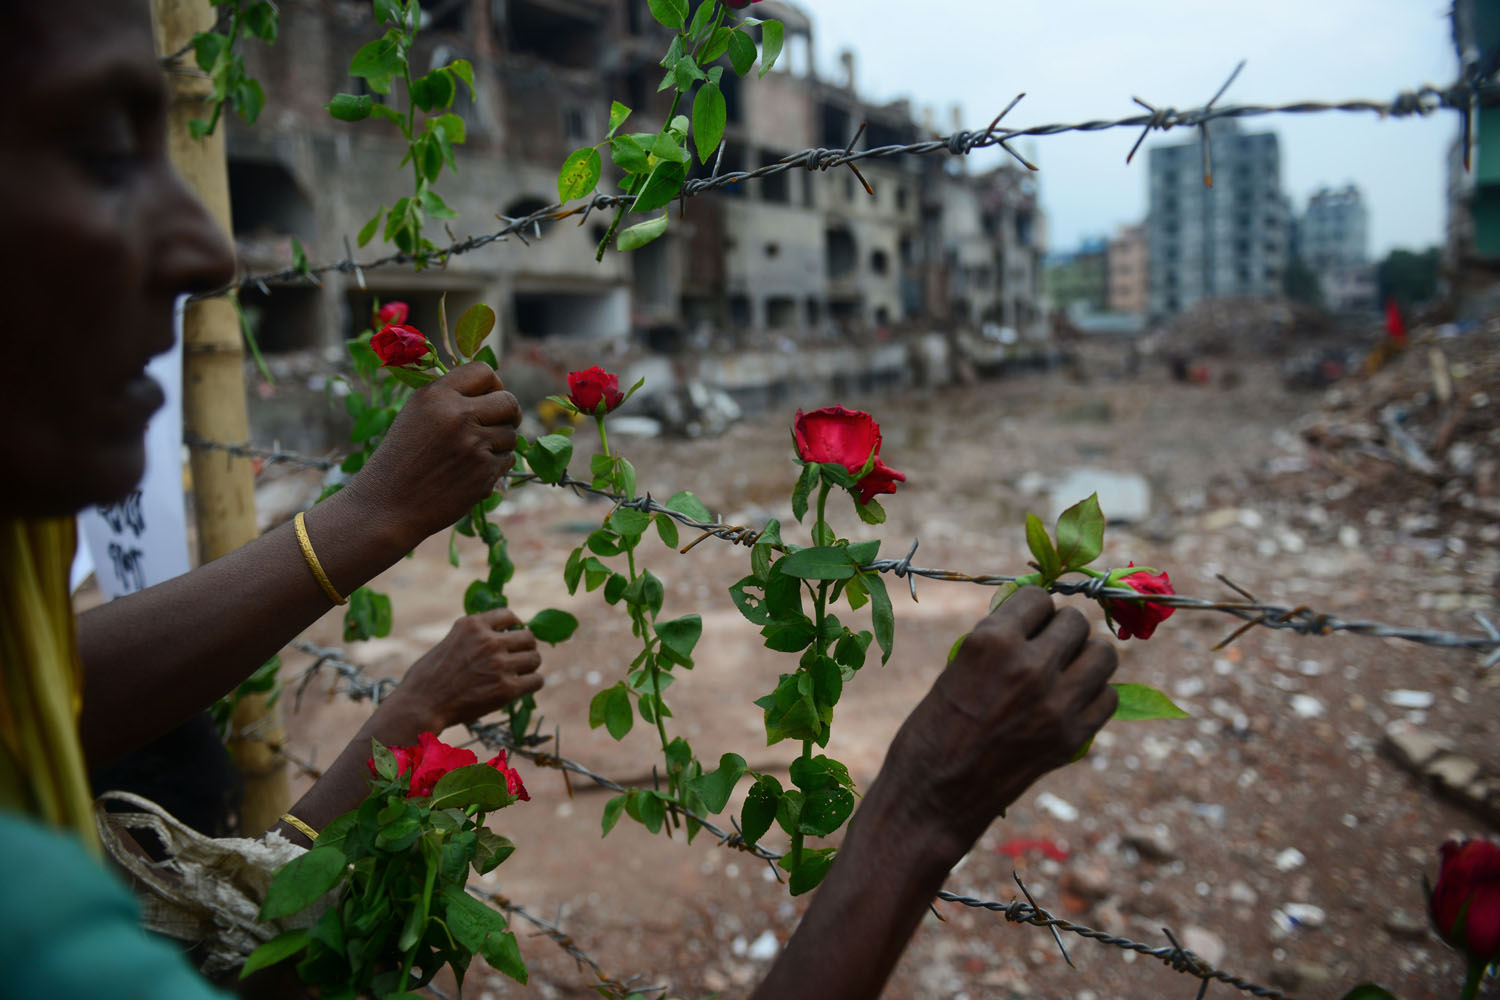 May 24, 2013. A Bangladeshi family member of a missing garment worker places roses on the barbed wire fence as she pays tribute to the victims at the site of the nine-story building collapse in Savar.